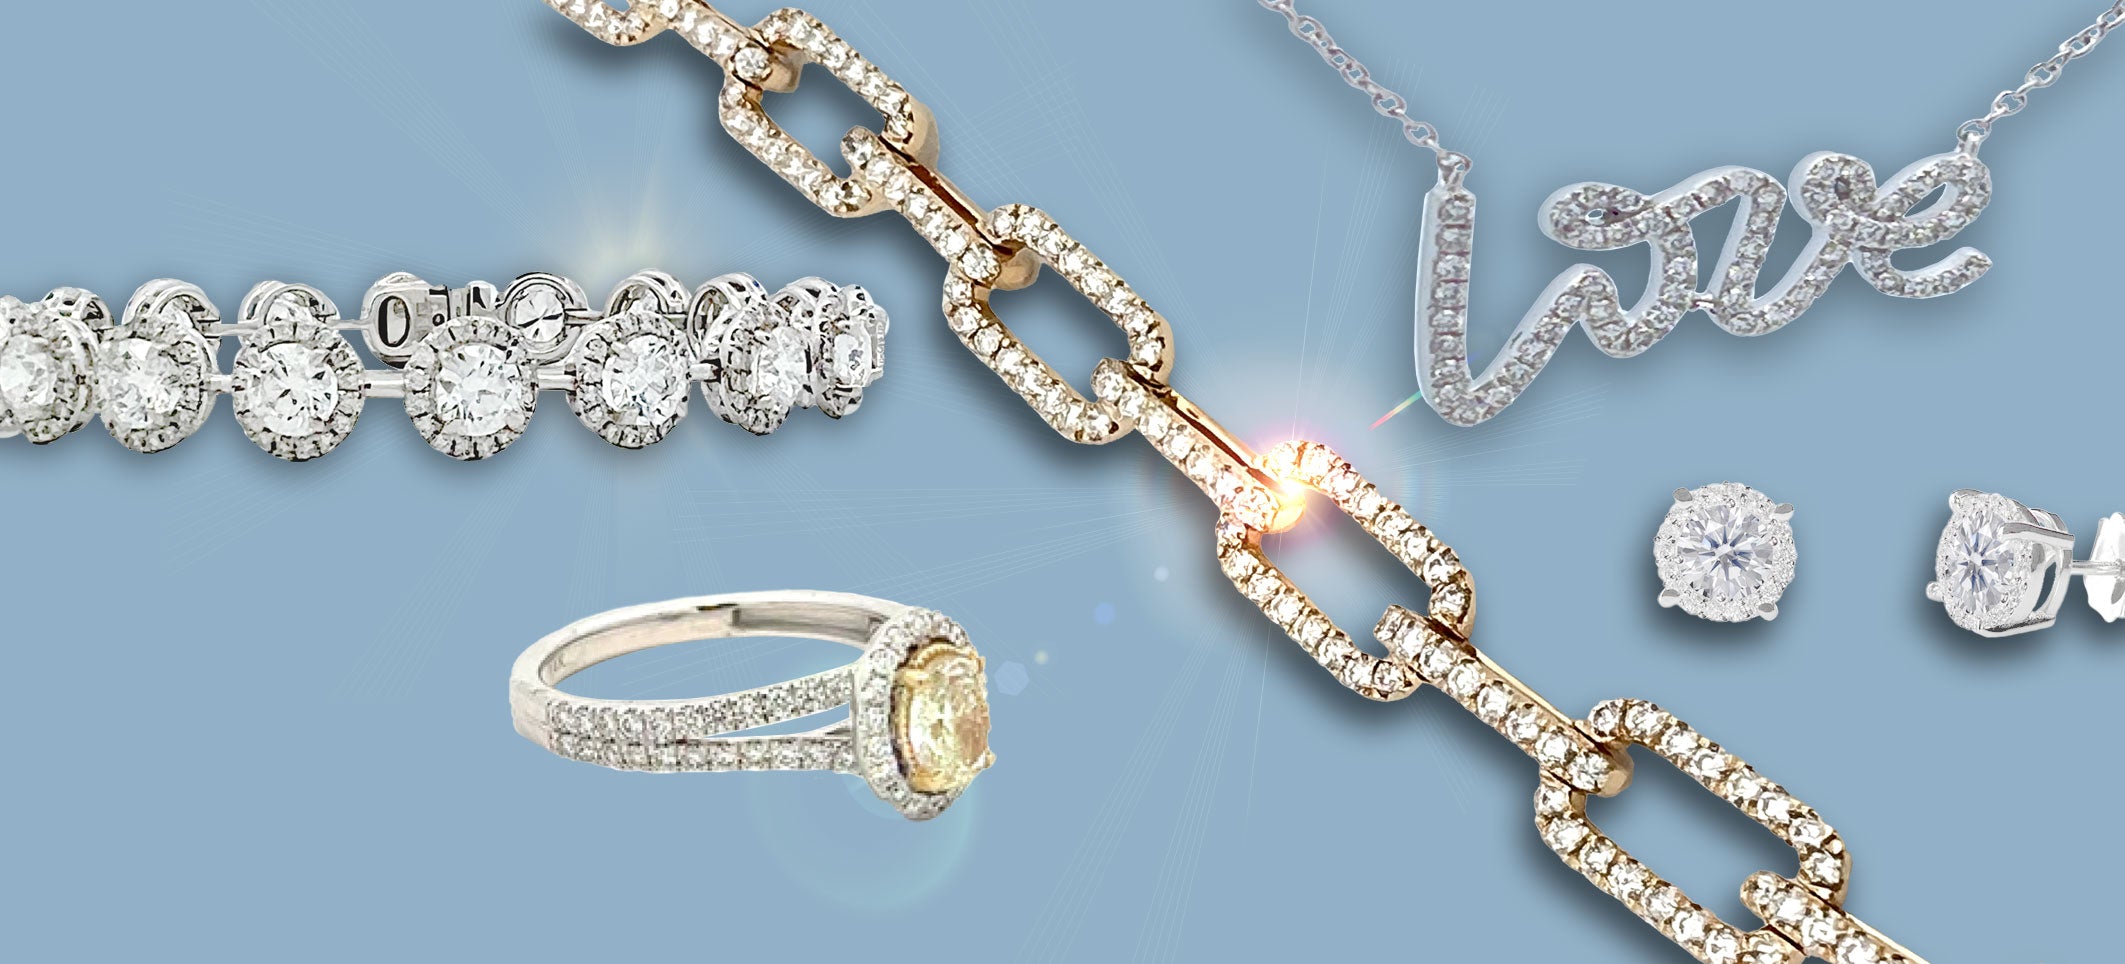 Shannon Jewelers - Spring's Home for Fine Jewelry, Diamonds & Engagement  Rings